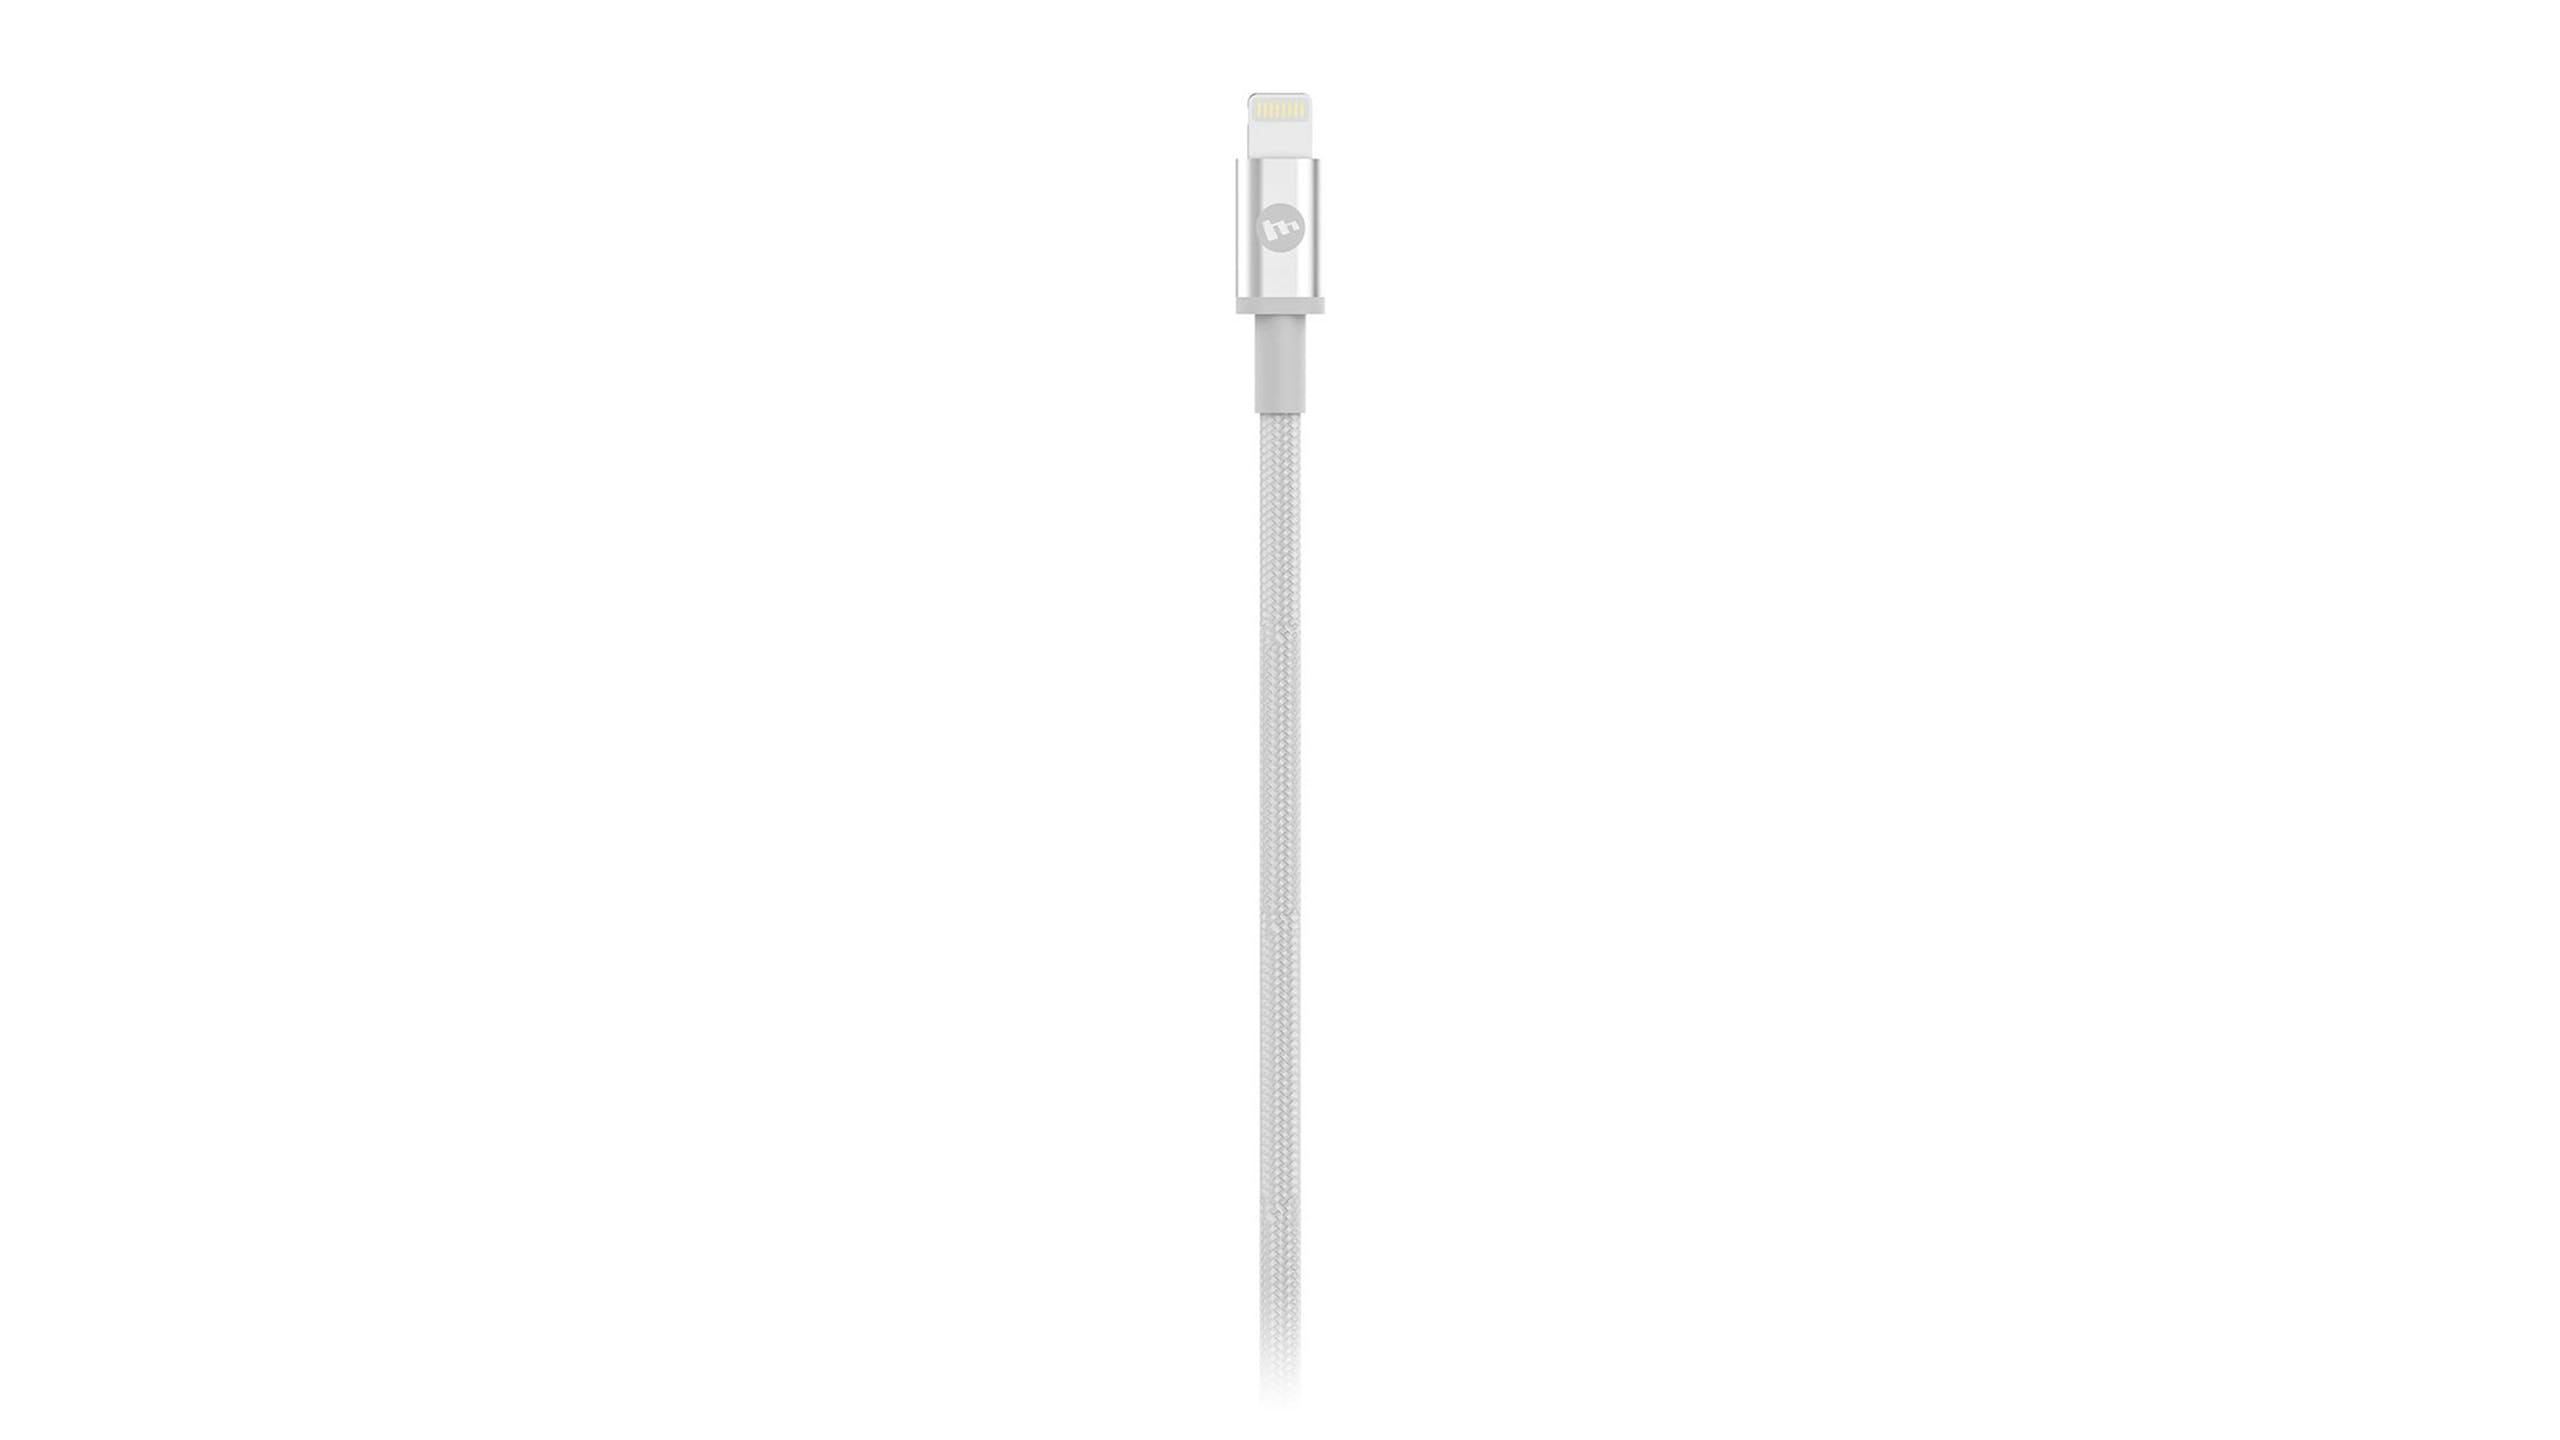 Mophie USB-C to Lightning Cable 1.8m - White (409903199)